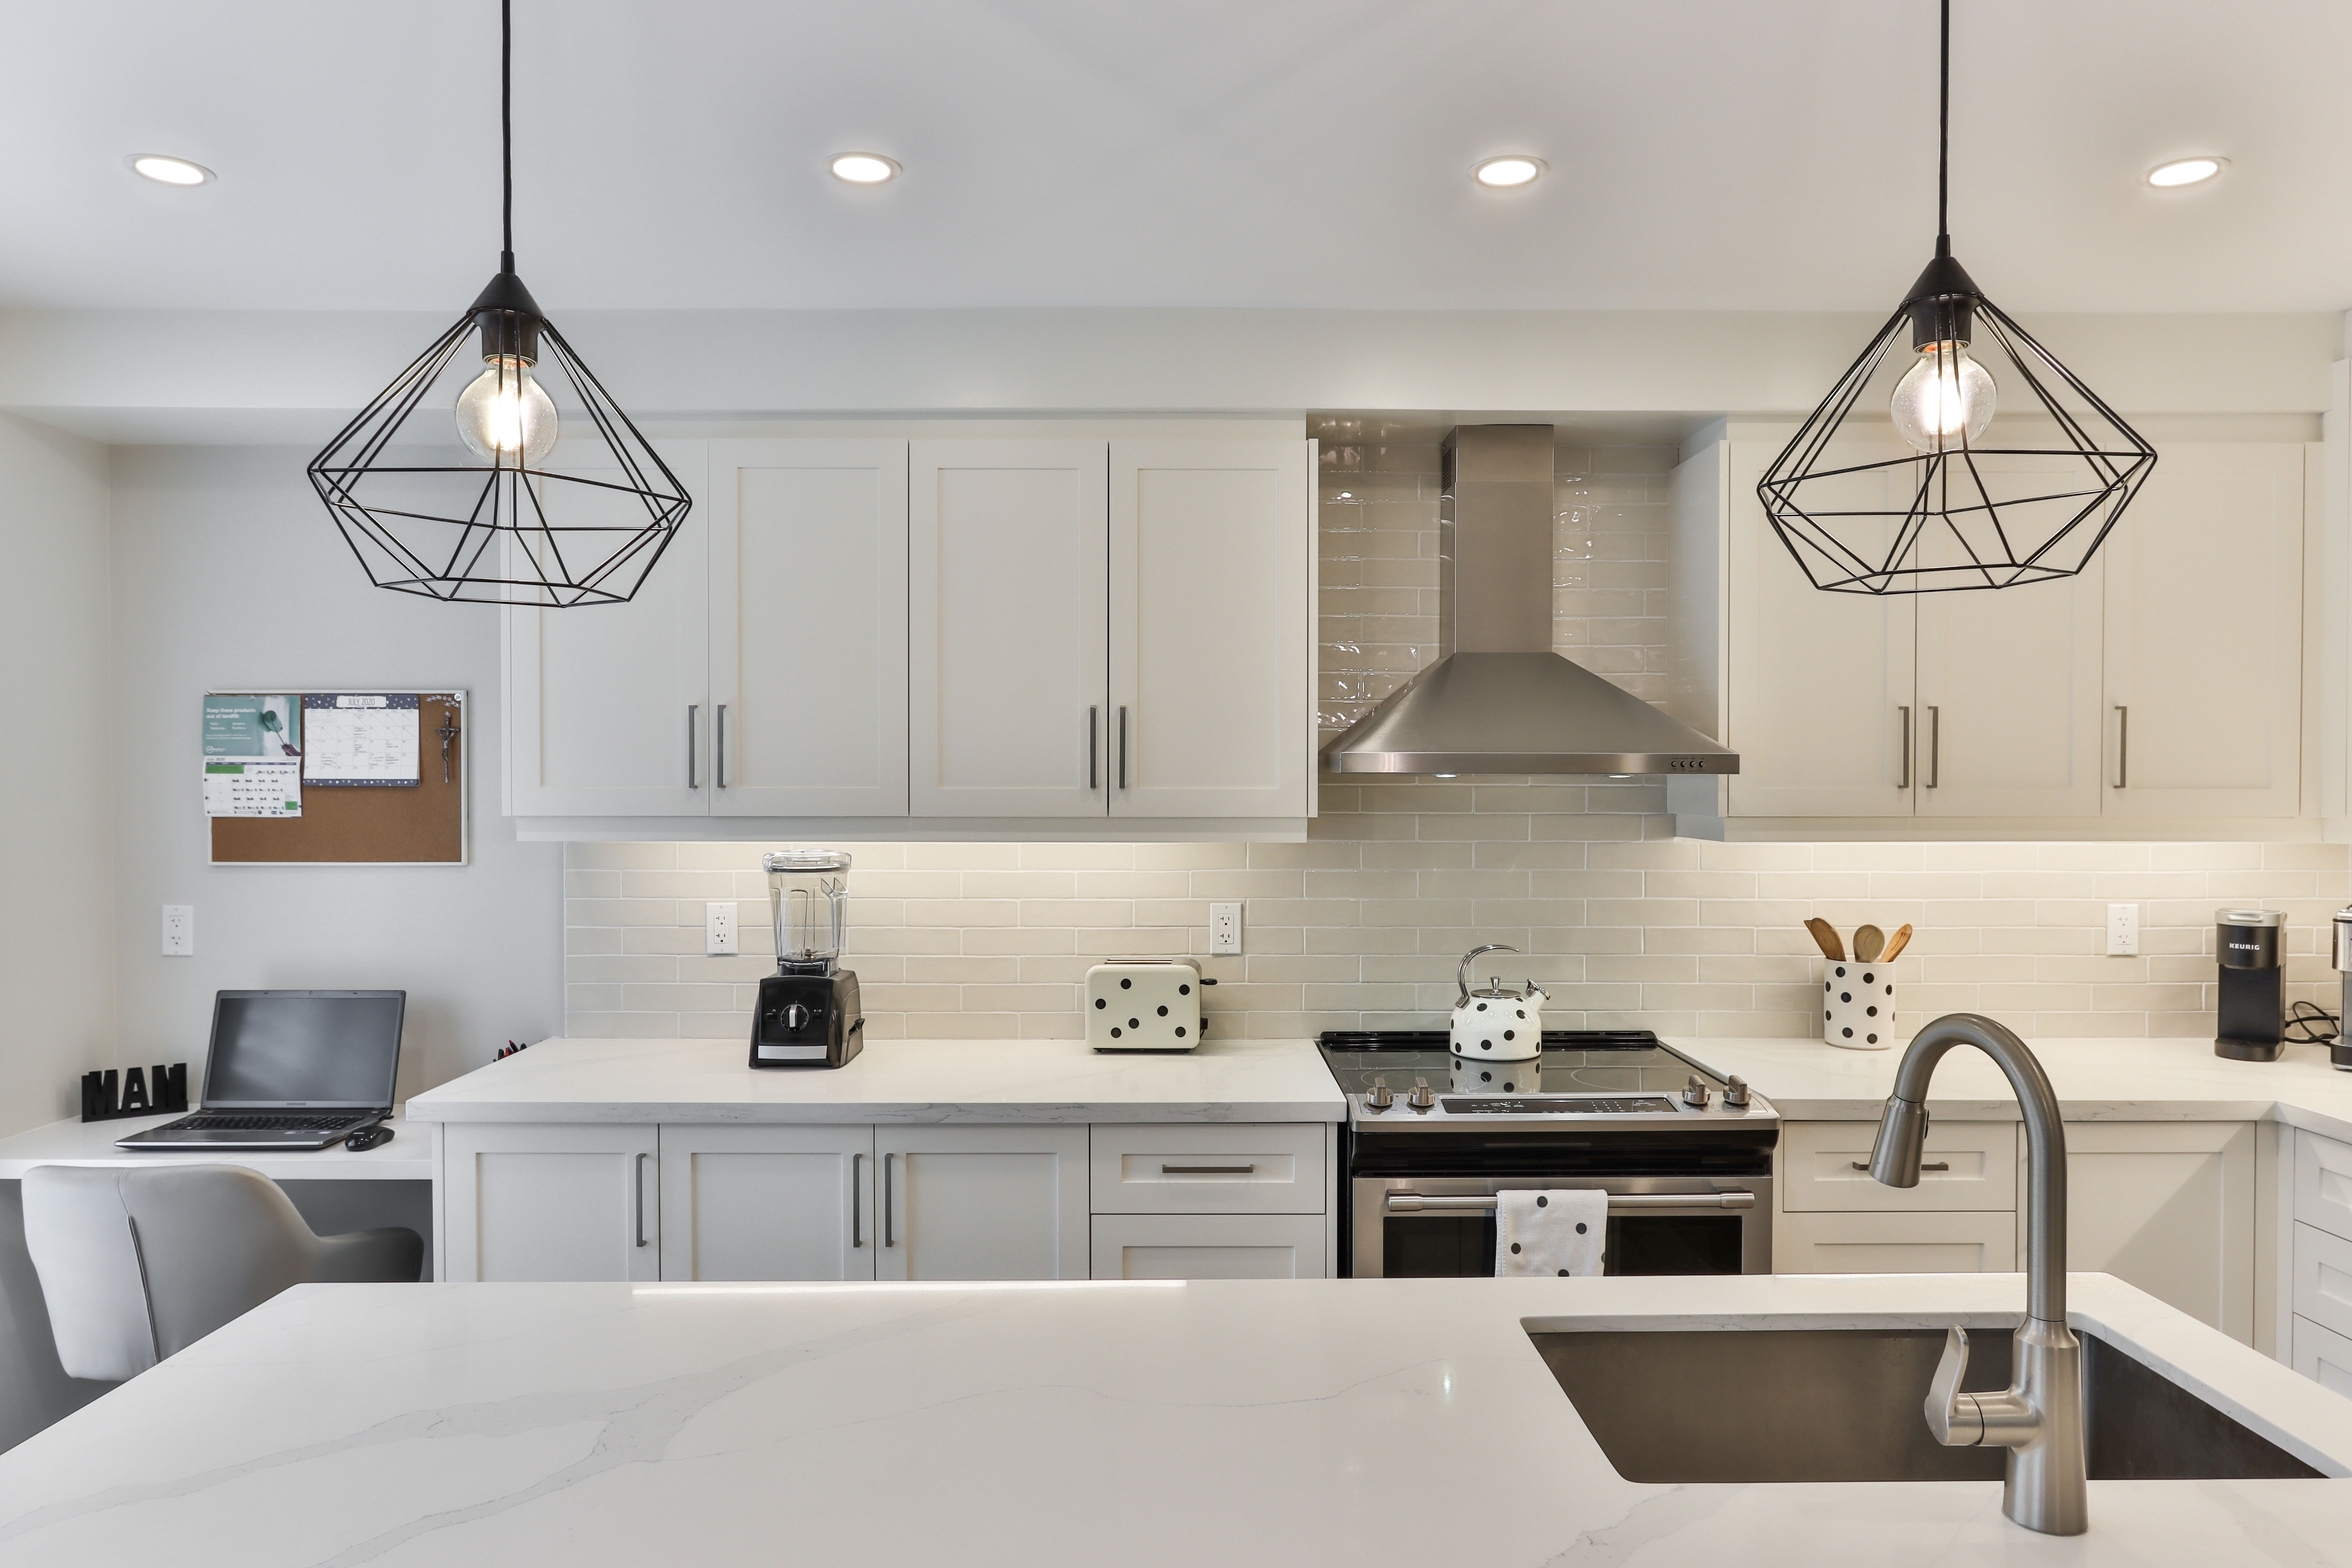 white wooden kitchen cabinet with black pendant lamp